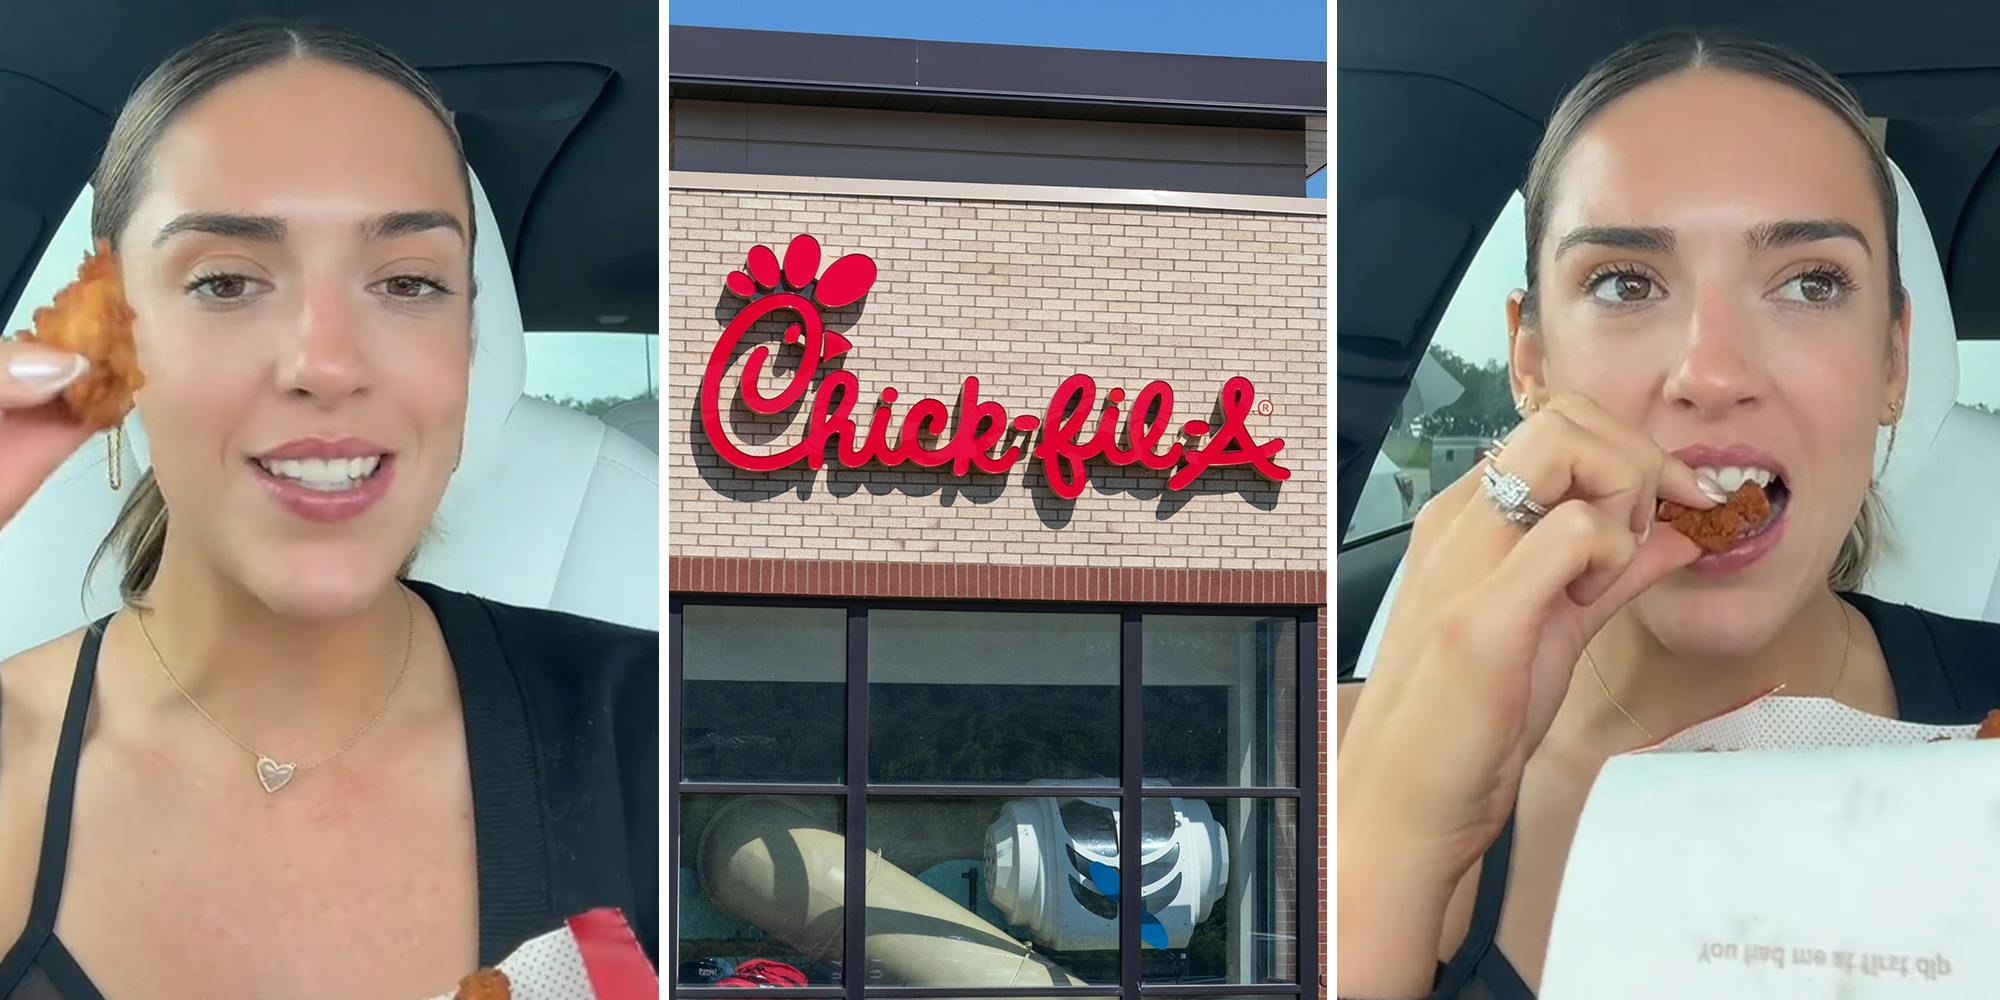 ‘This tastes like rubber’: Chick-fil-A customer contends fast-food chain changed its chicken, and she doesn’t like it